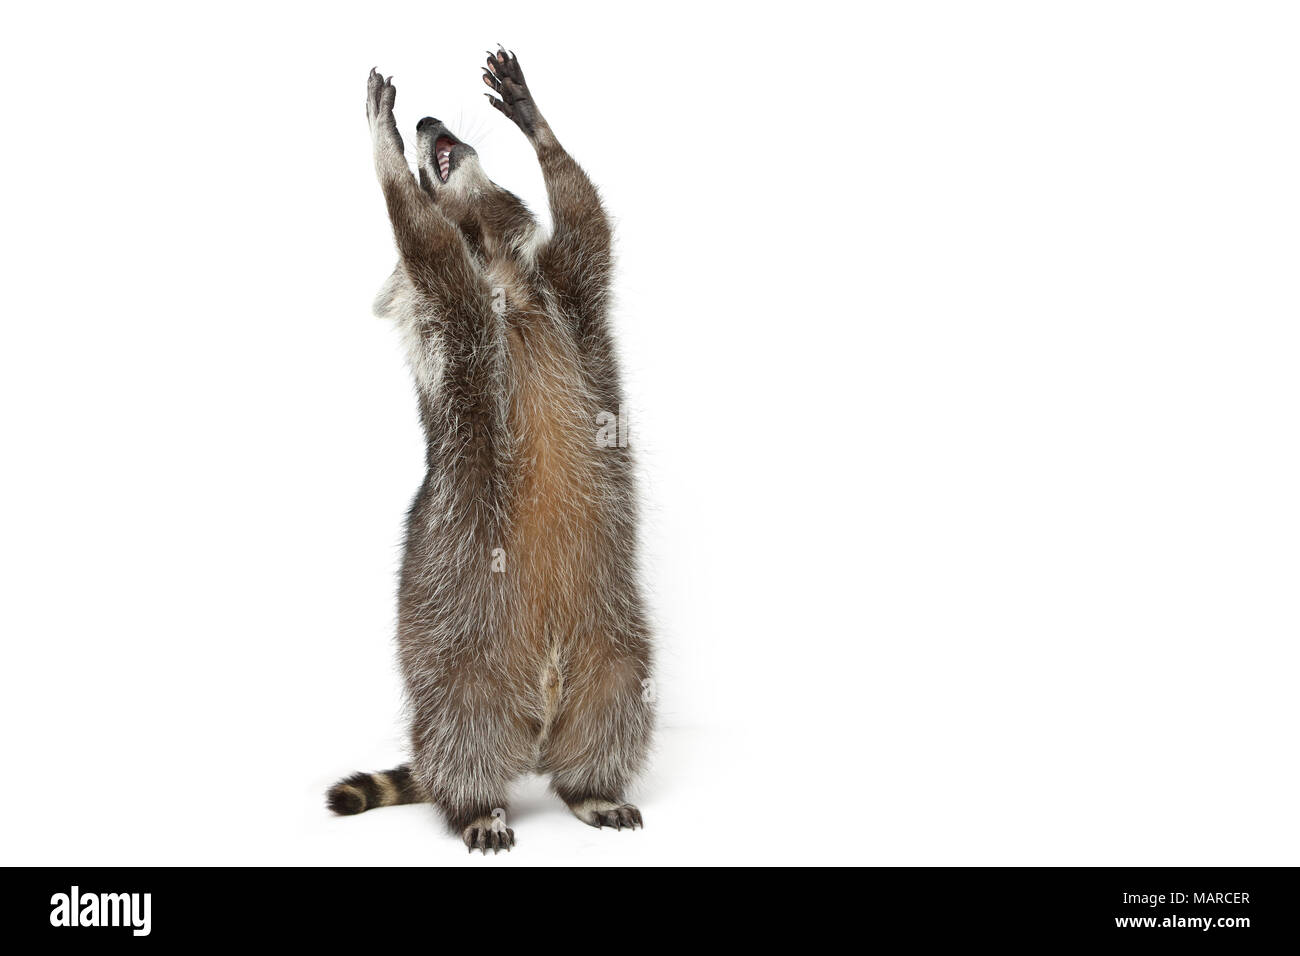 Raccoon (Procyon lotor). Adult standing on its hind legs, stretching. Studio picture against a white background. Germany Stock Photo